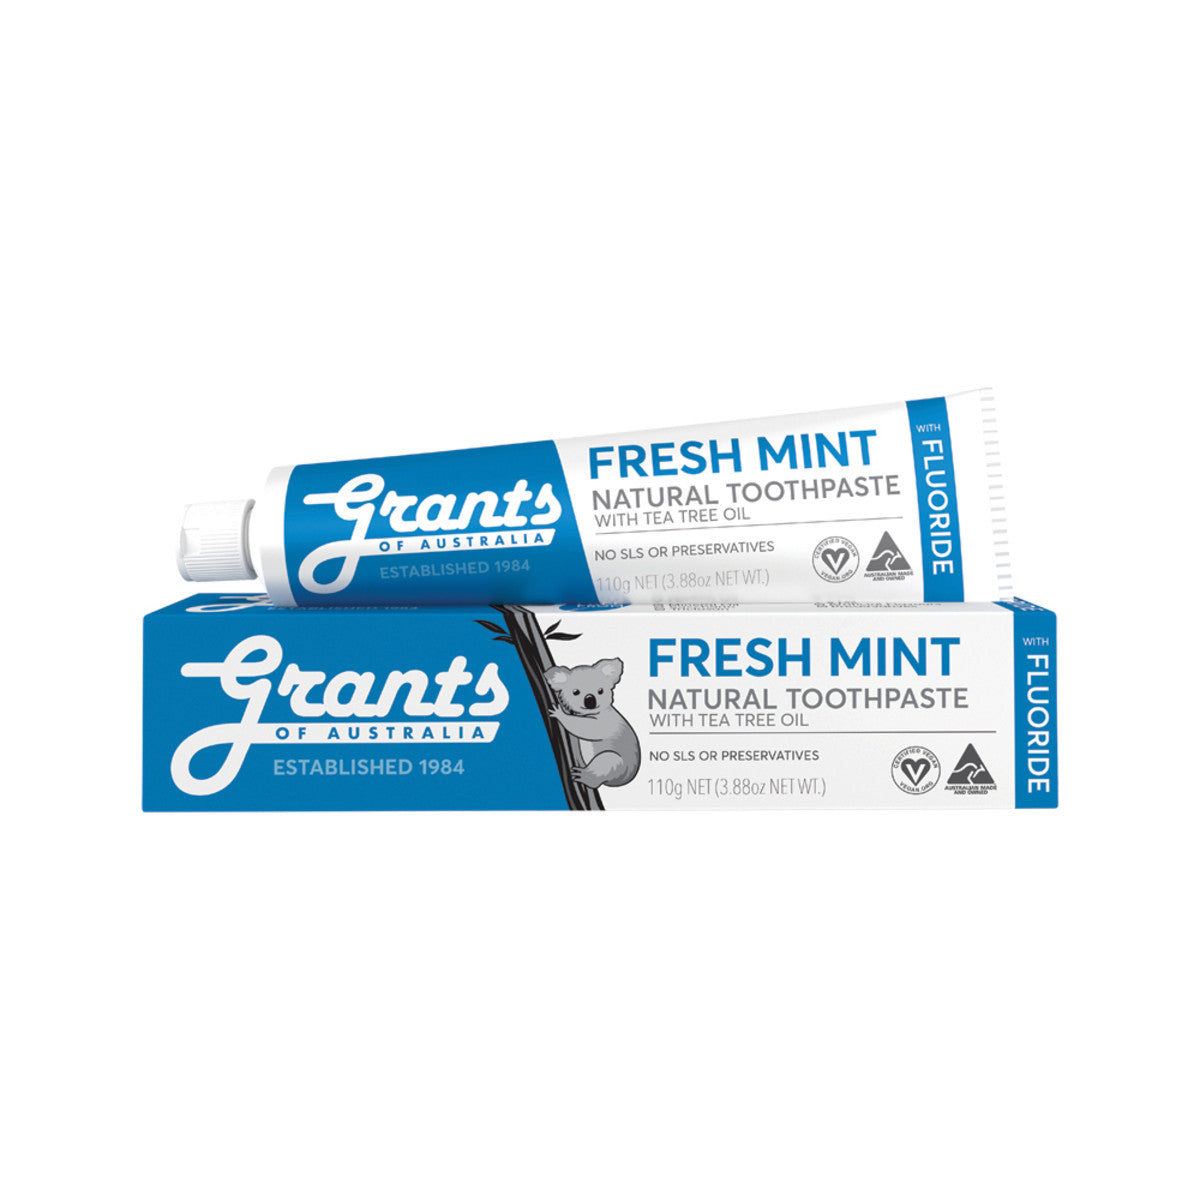 Grants - Natural Toothpaste (Fresh Mint with Tea Tree Oil)